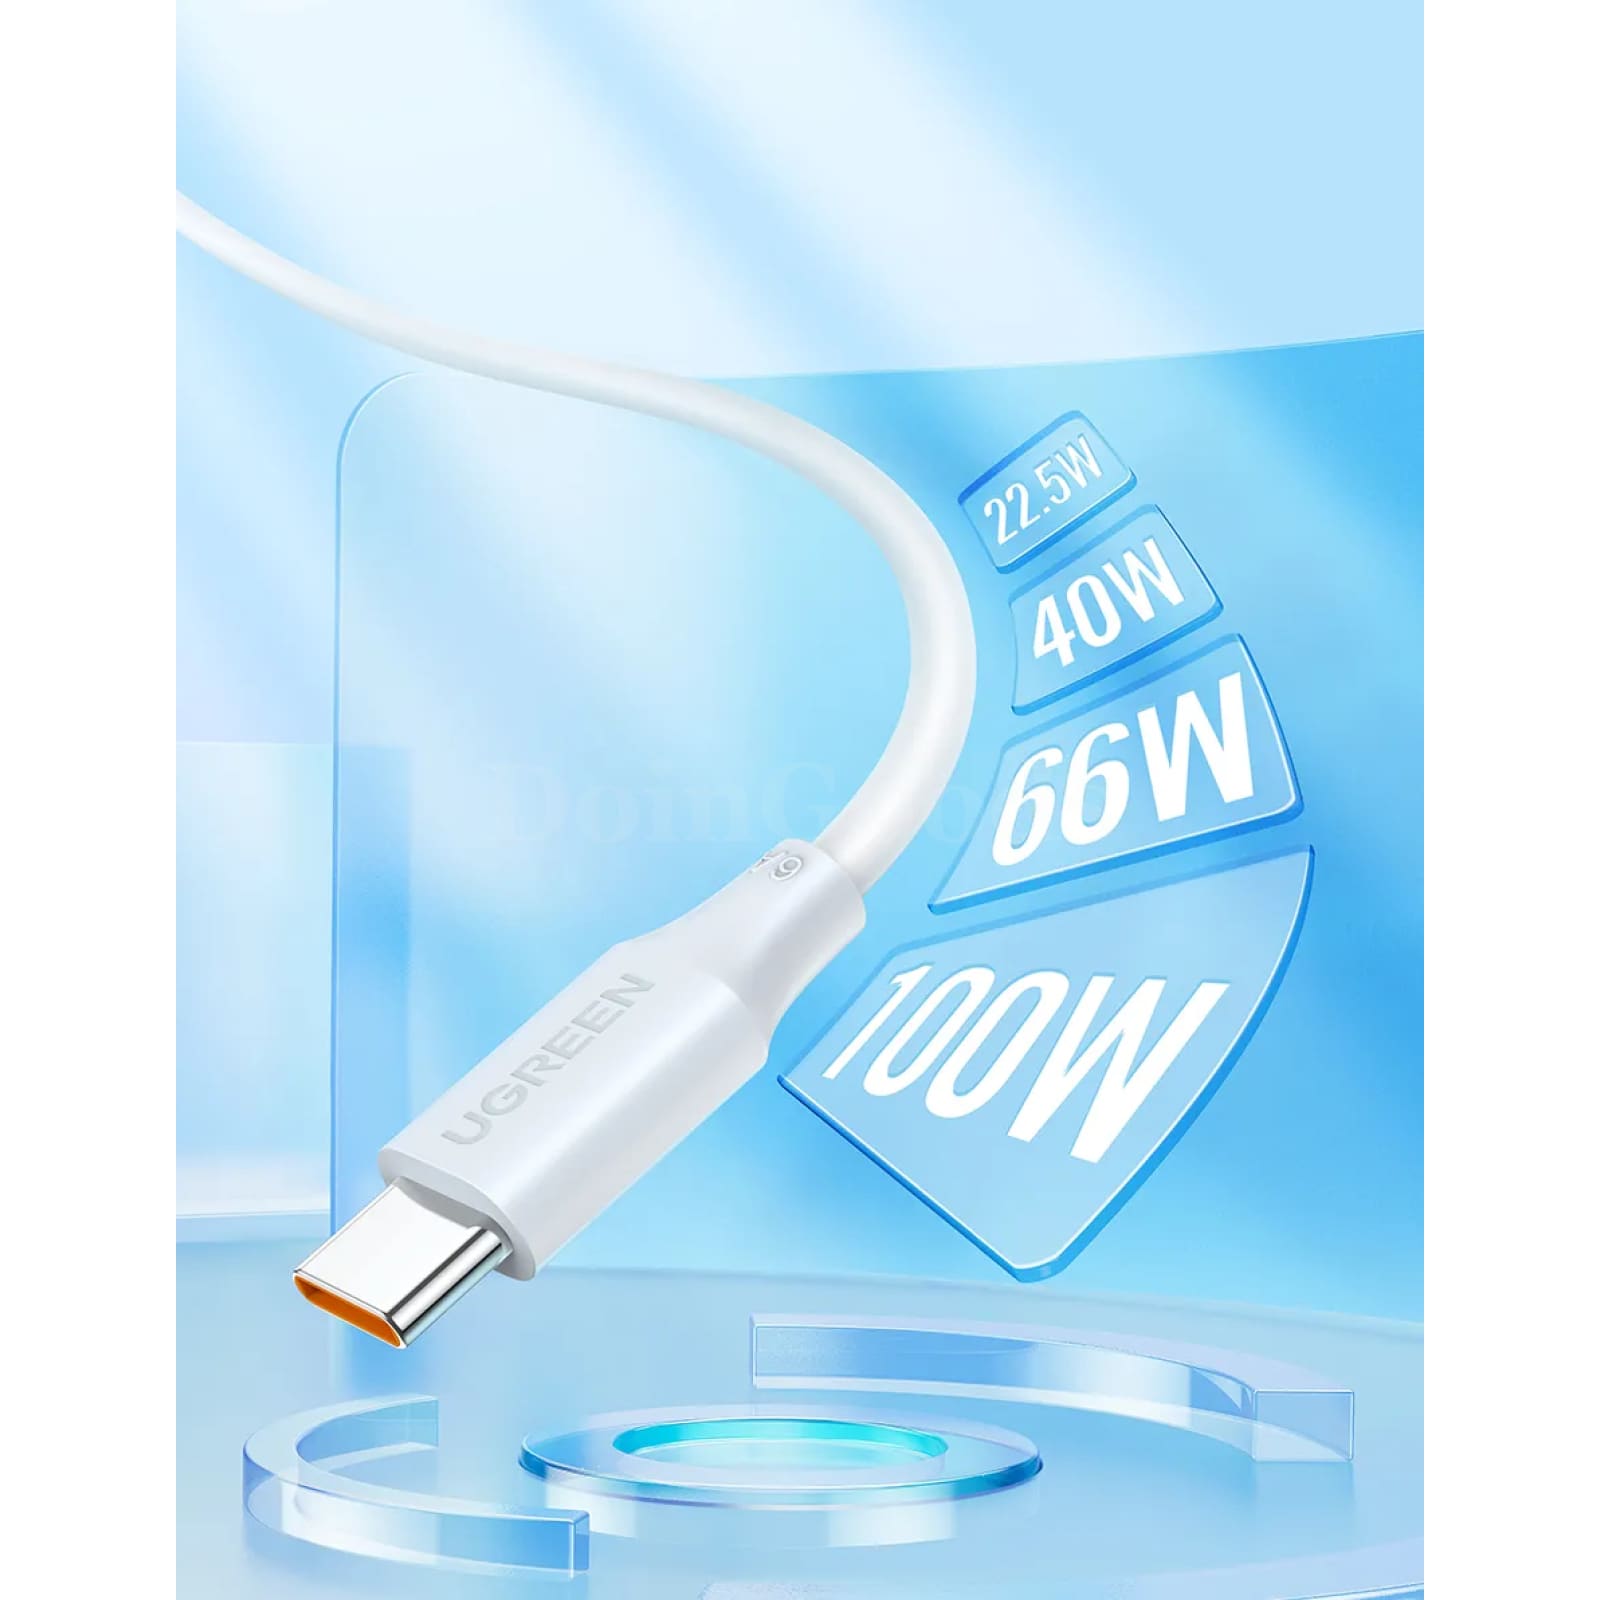 Ugreen 100W Usb Type C Cable 6A Huawei Honor 66W Xiaomi Fast Charging Data Cord 301635